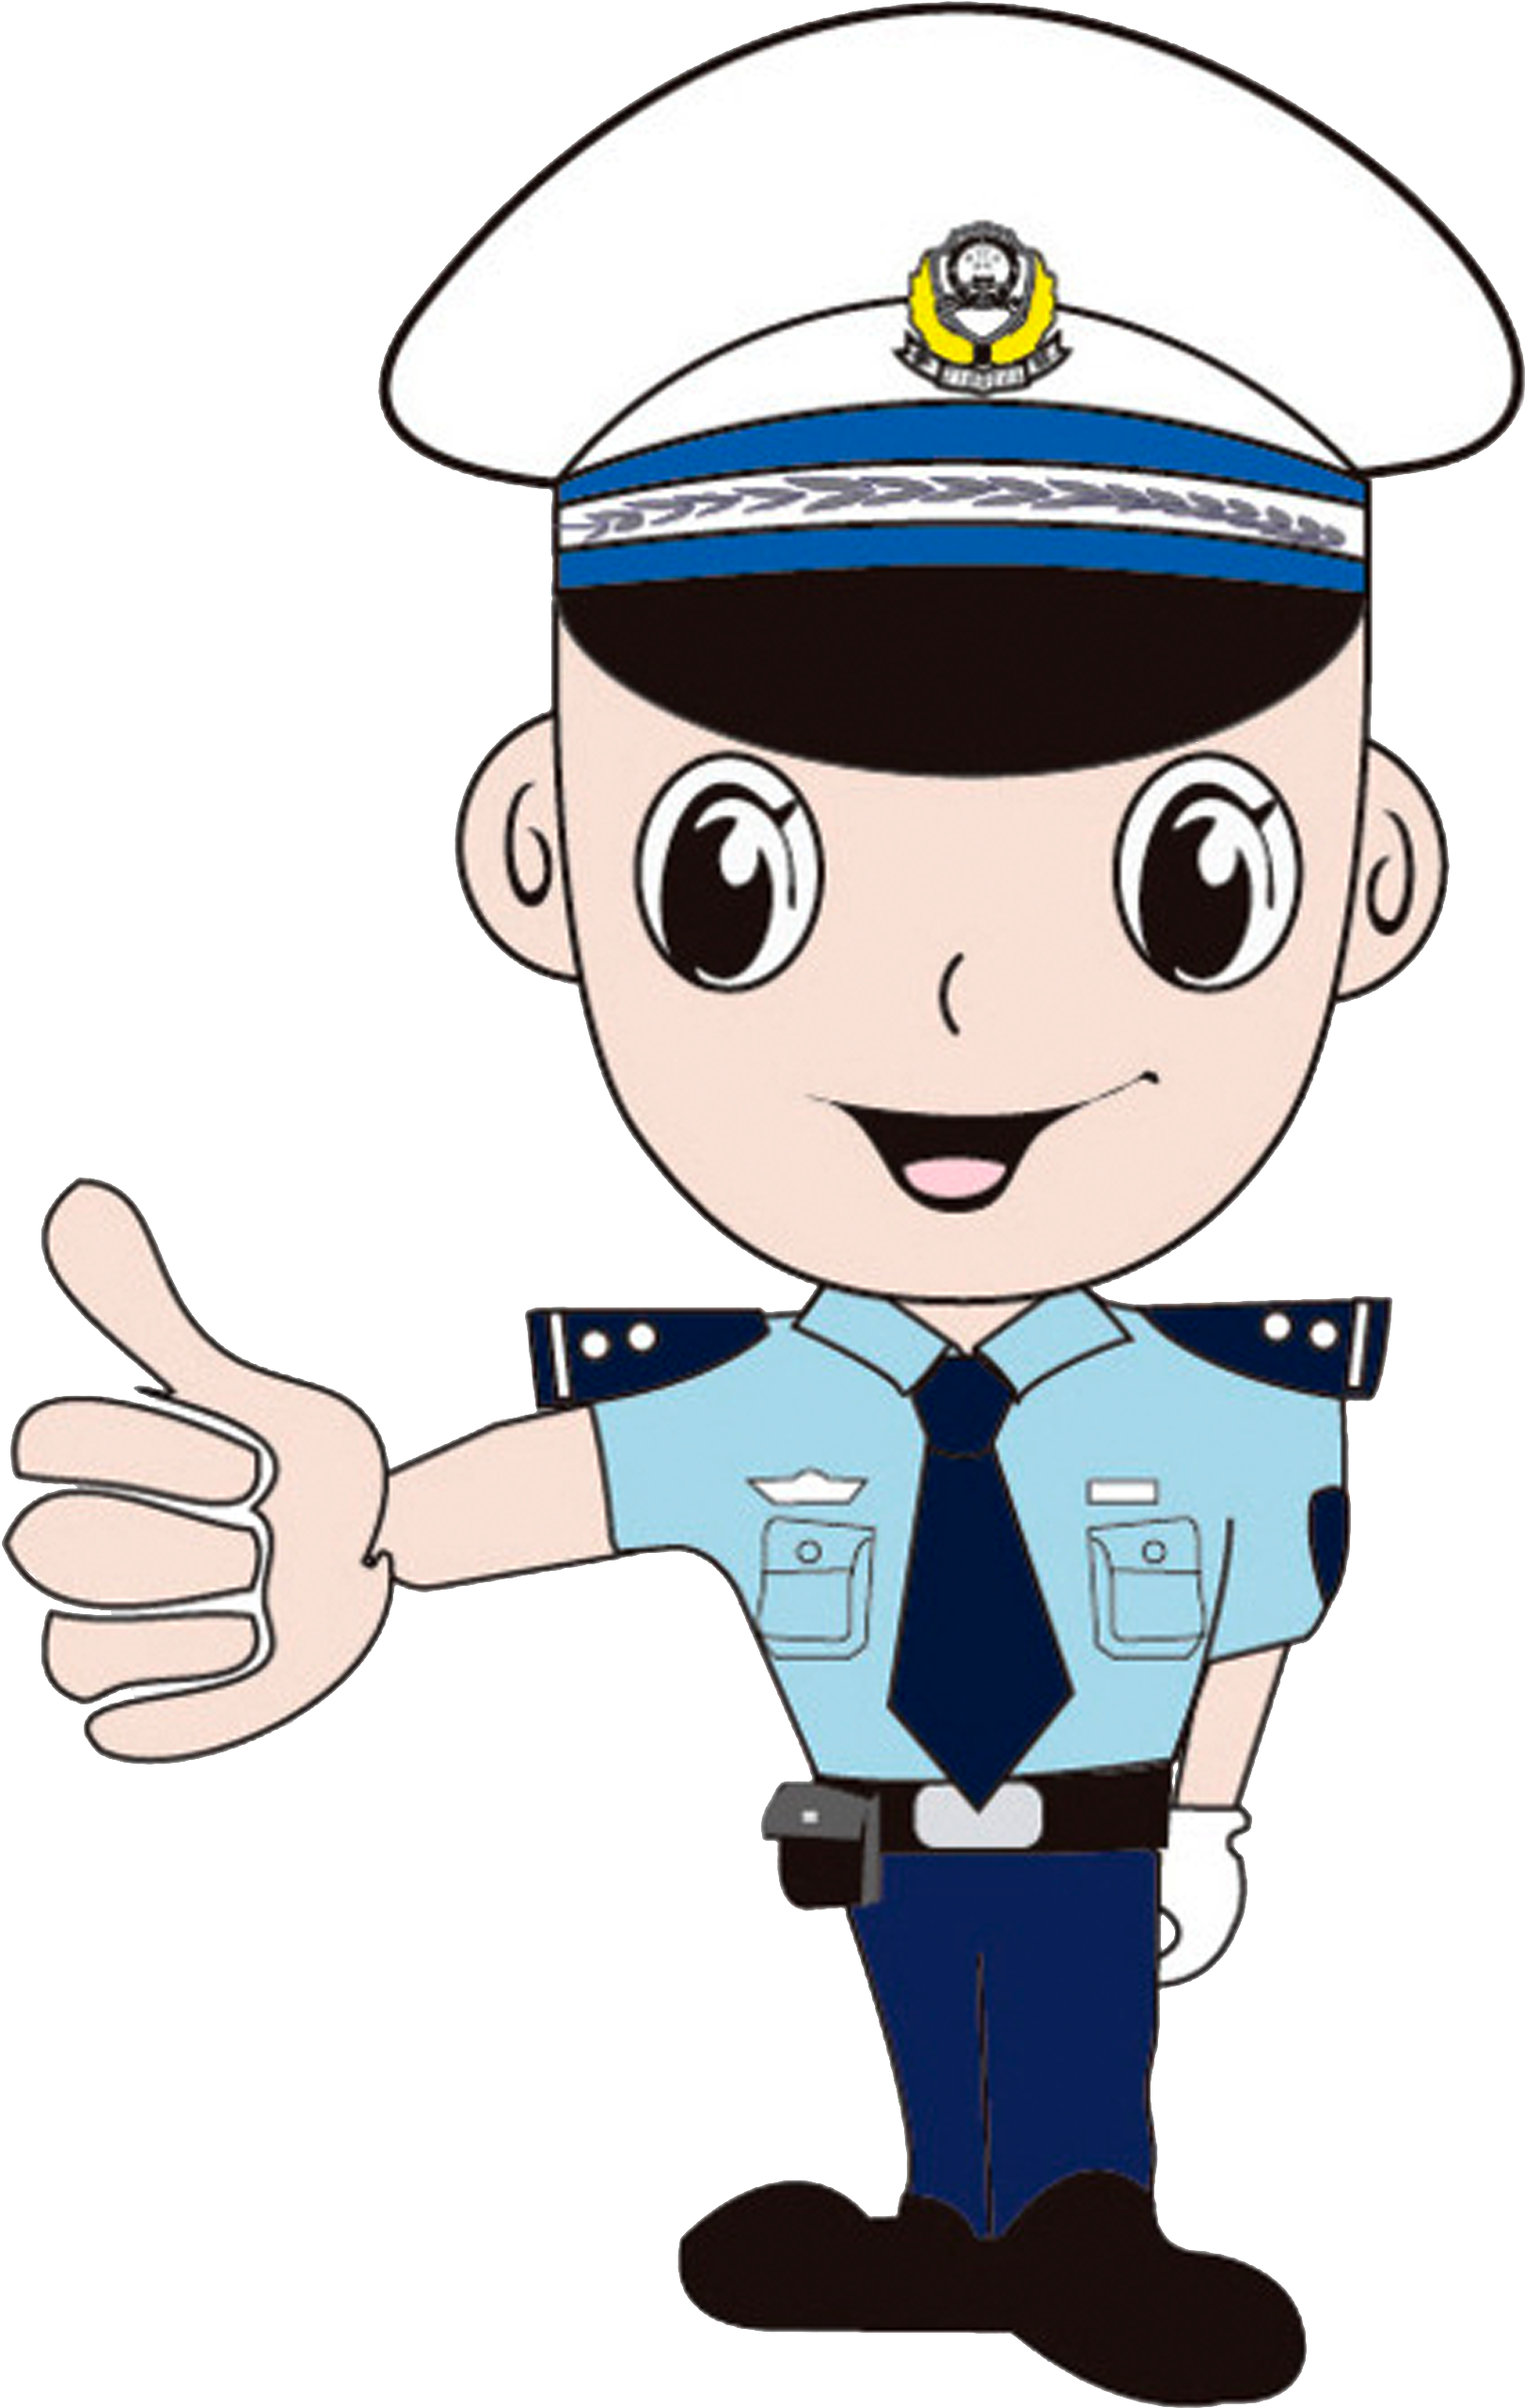 Thumb Signal Gesture Police Officer - Thumb Signal (5000x5000)